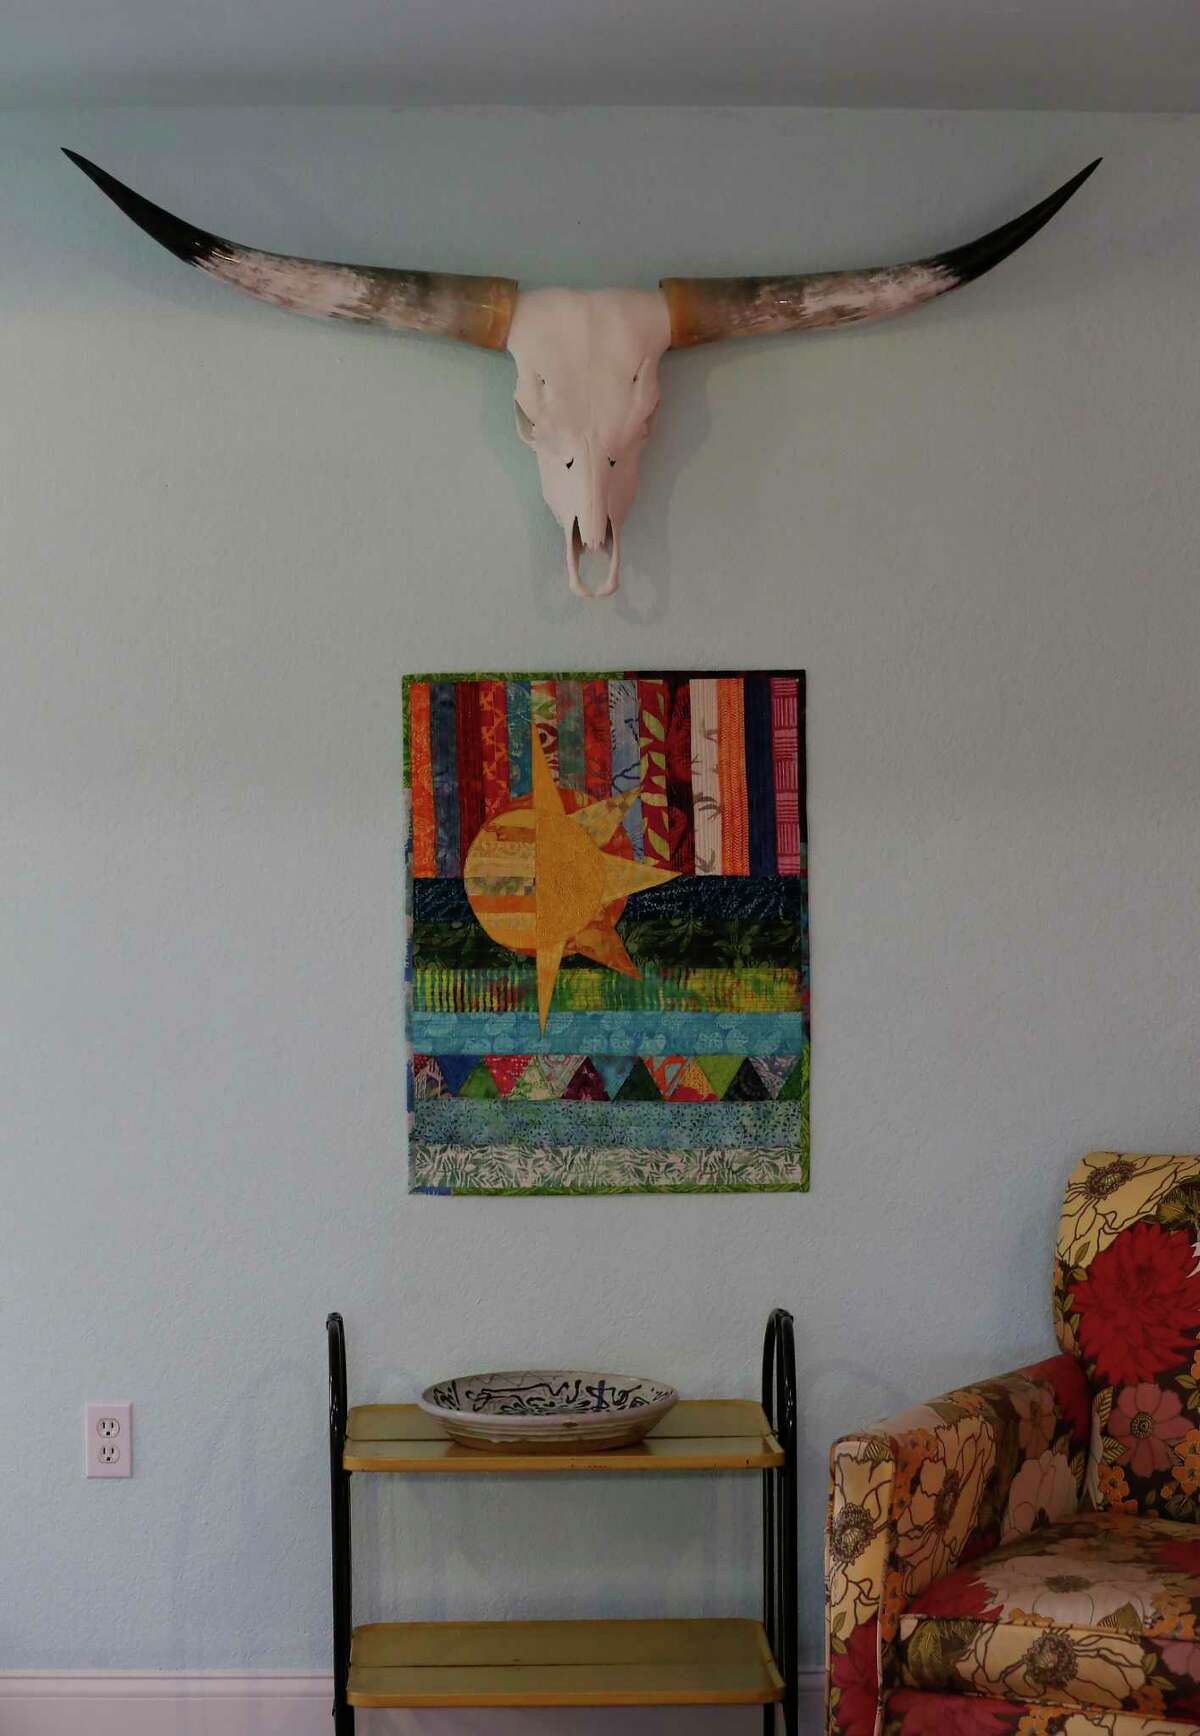 Susan Logrbrinck decorated much of the home with her textile art.